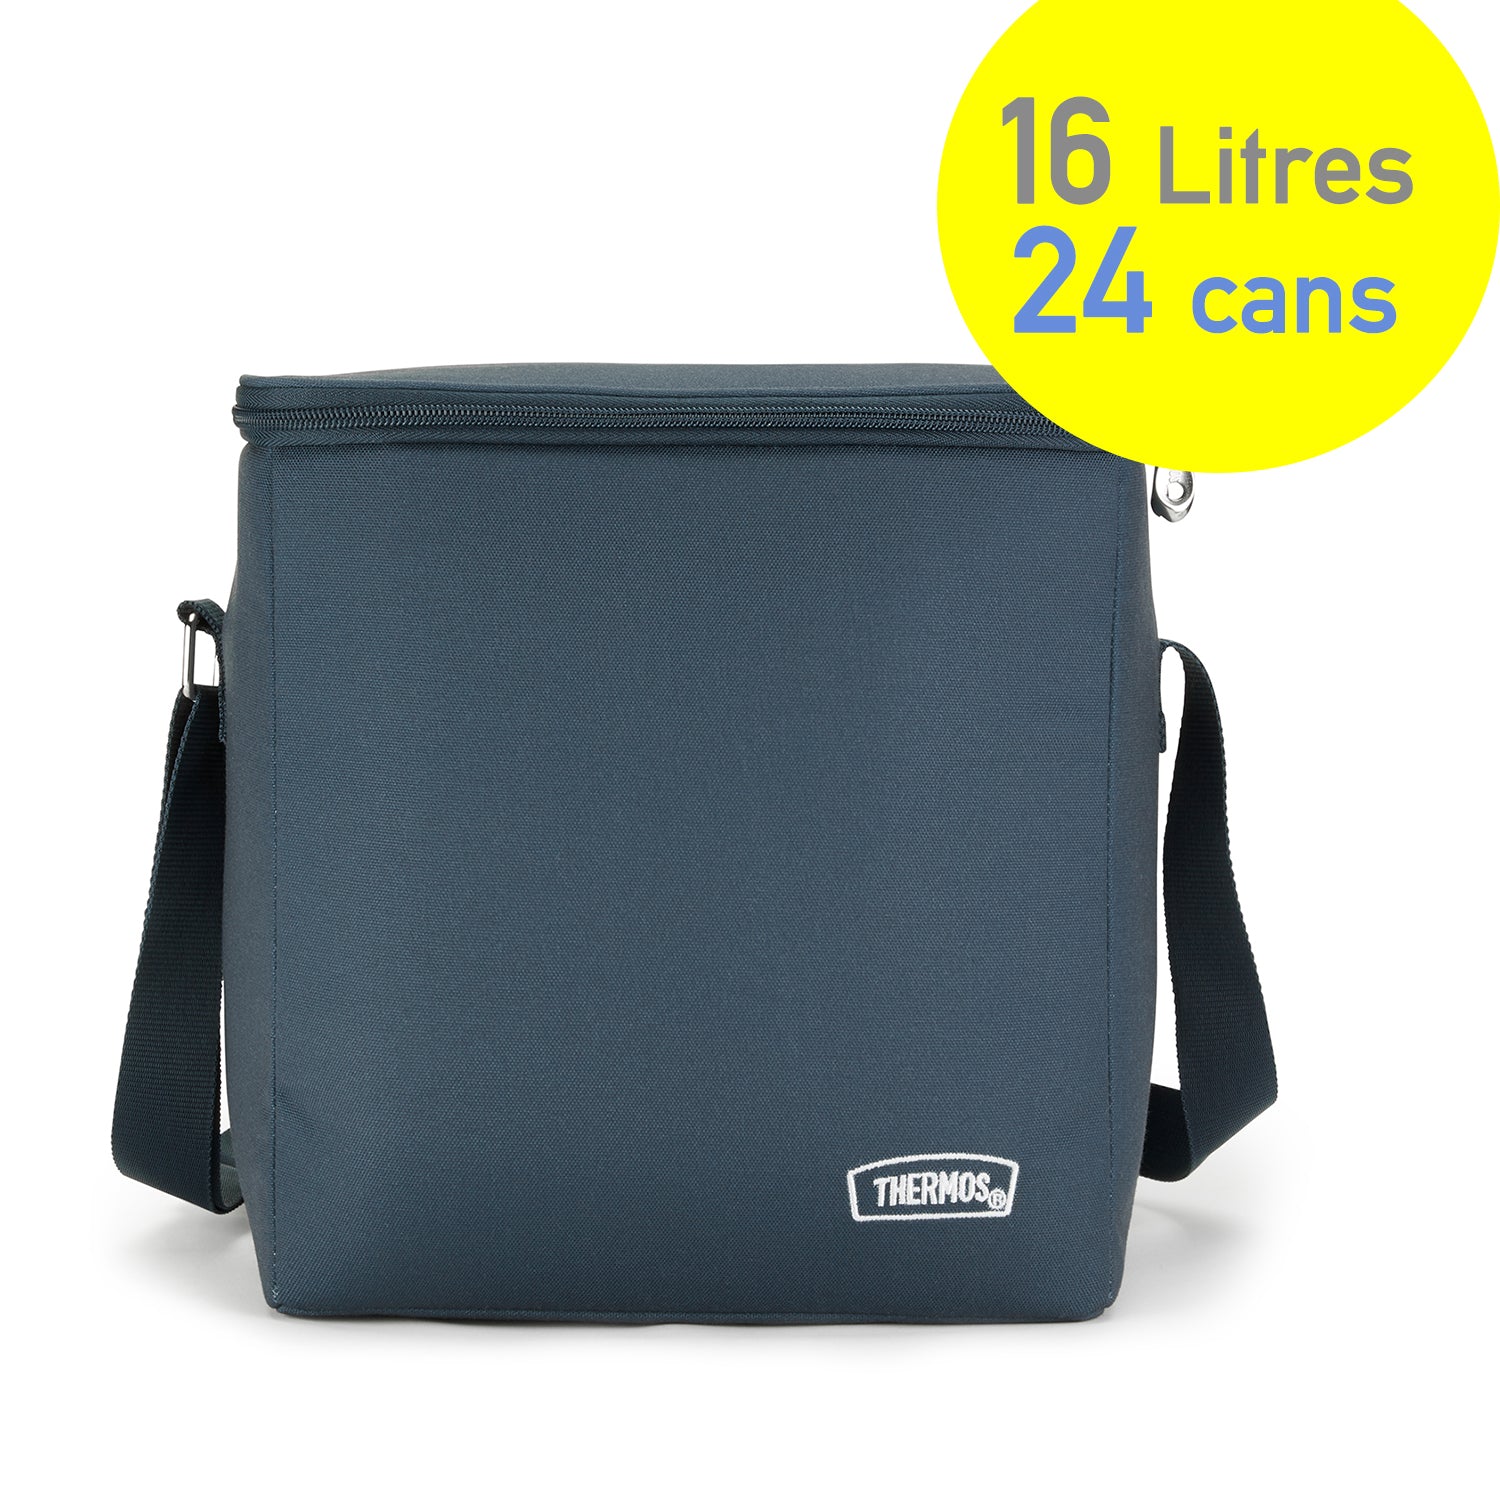 Thermos 16L EcoCool Insulated Picnic Bag